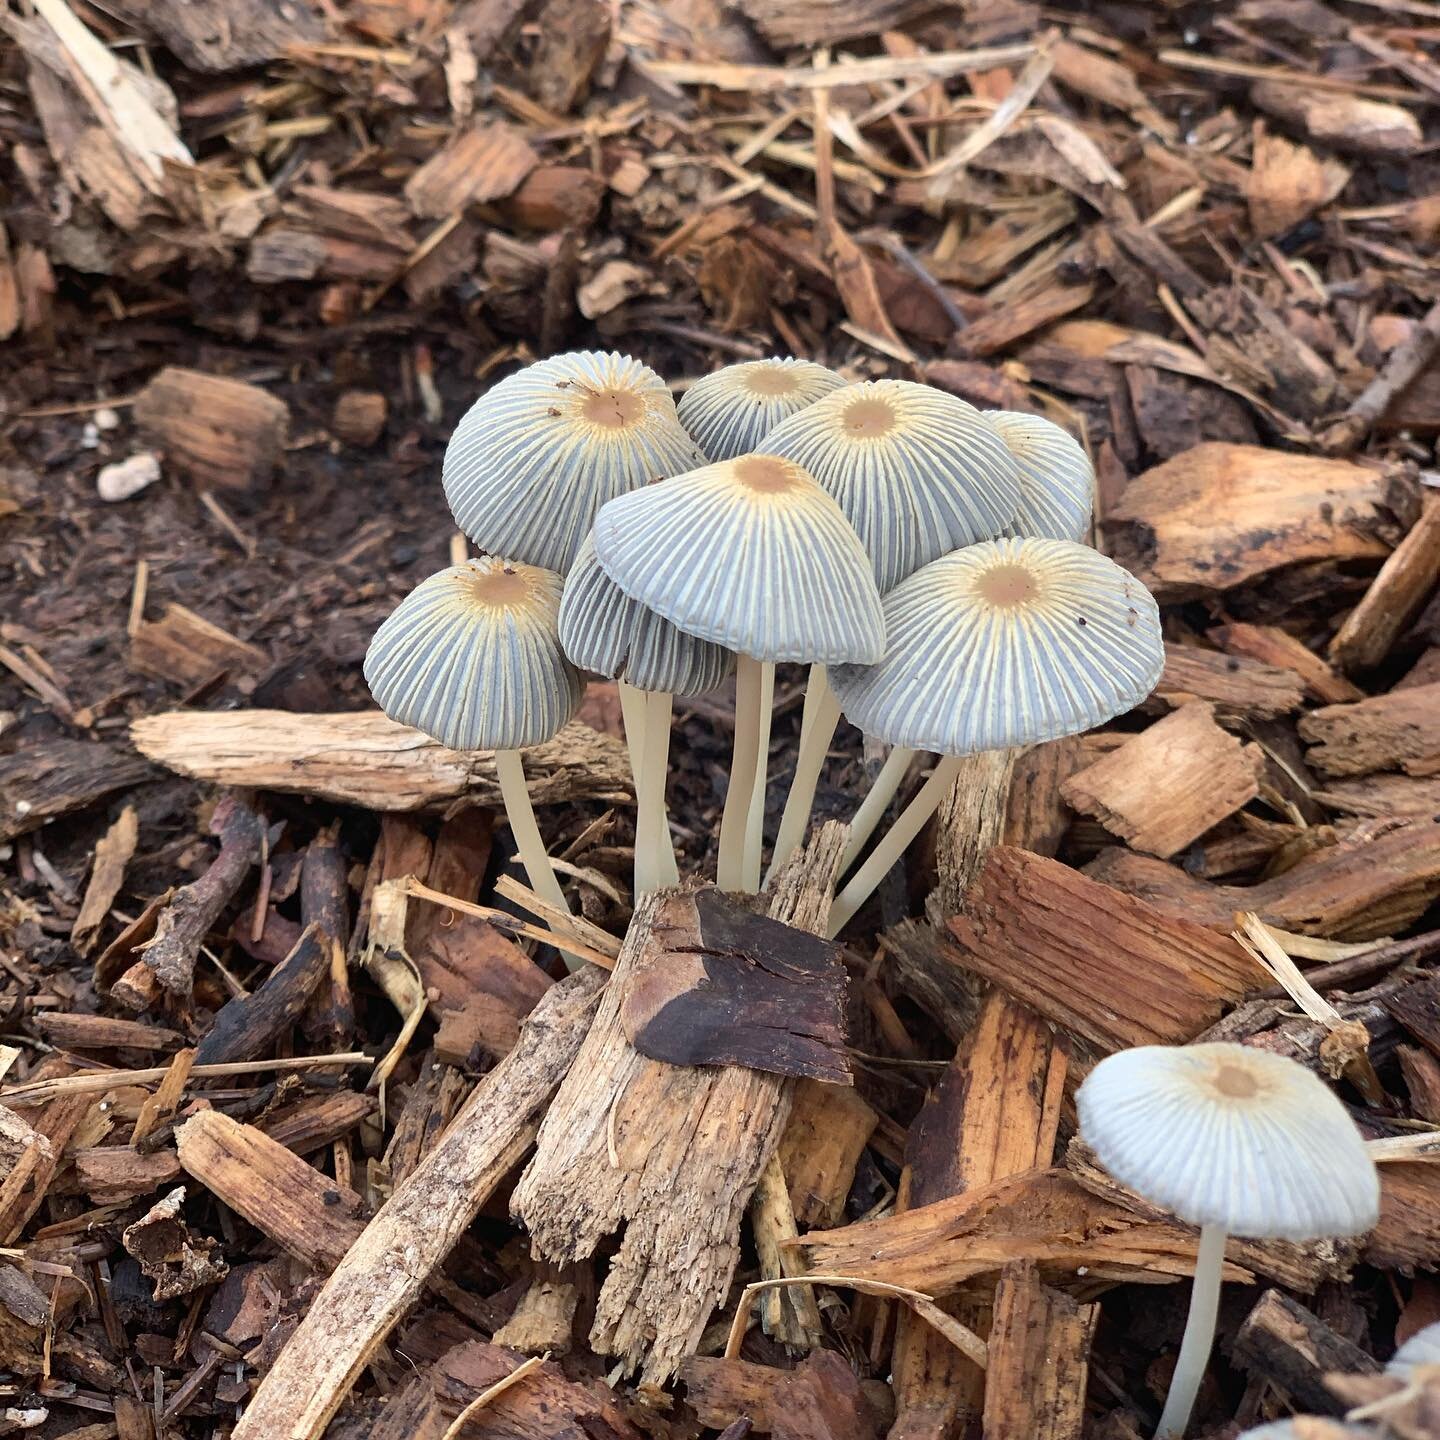 Mushrooms are one of nature&rsquo;s beautiful mysteries! There is magic happening beneath our feet! 🍄 #mushroomsofinstagram #mushroomsociety #mushrooms🍄 #naturelover #livingsoilgrown #cannabisoil #cbd #thc #gardening #farming